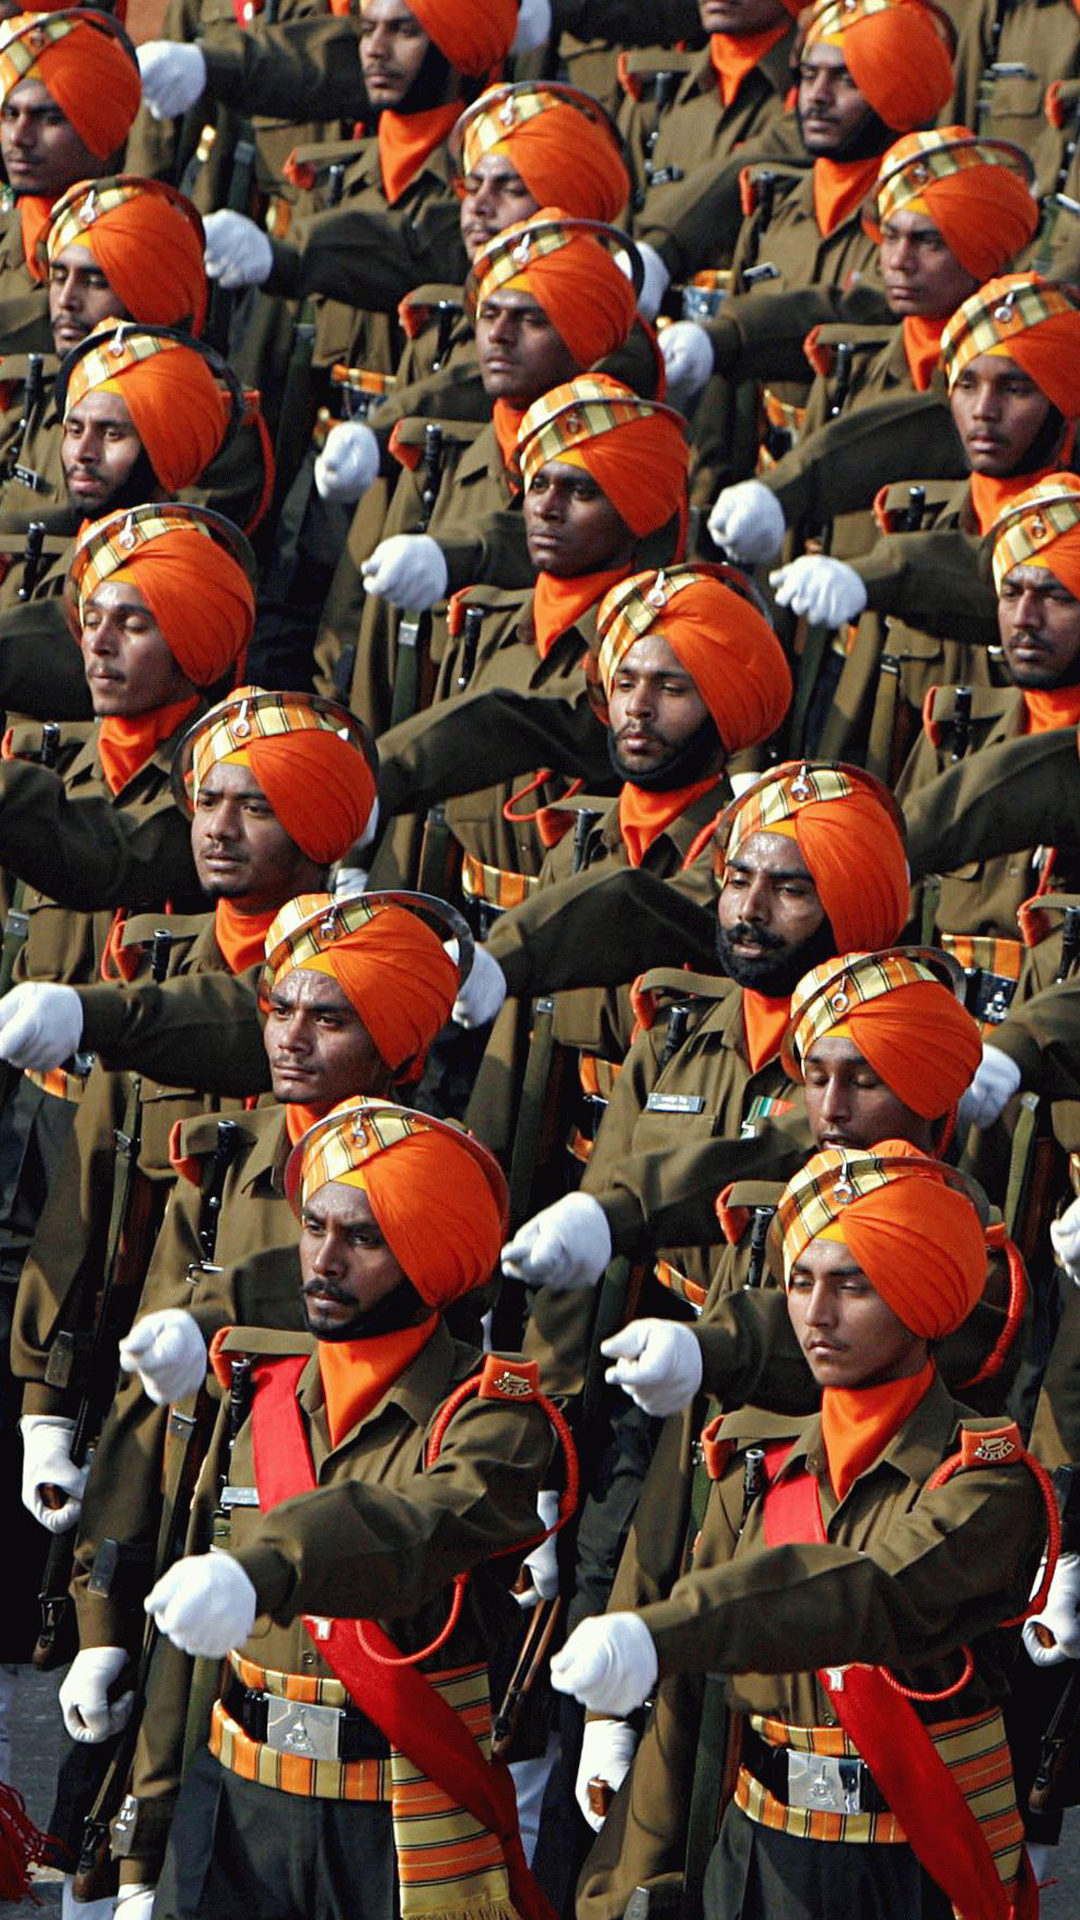 Indian Sikh Regiment Army Wallpaper for Mobile Phone - HD ...